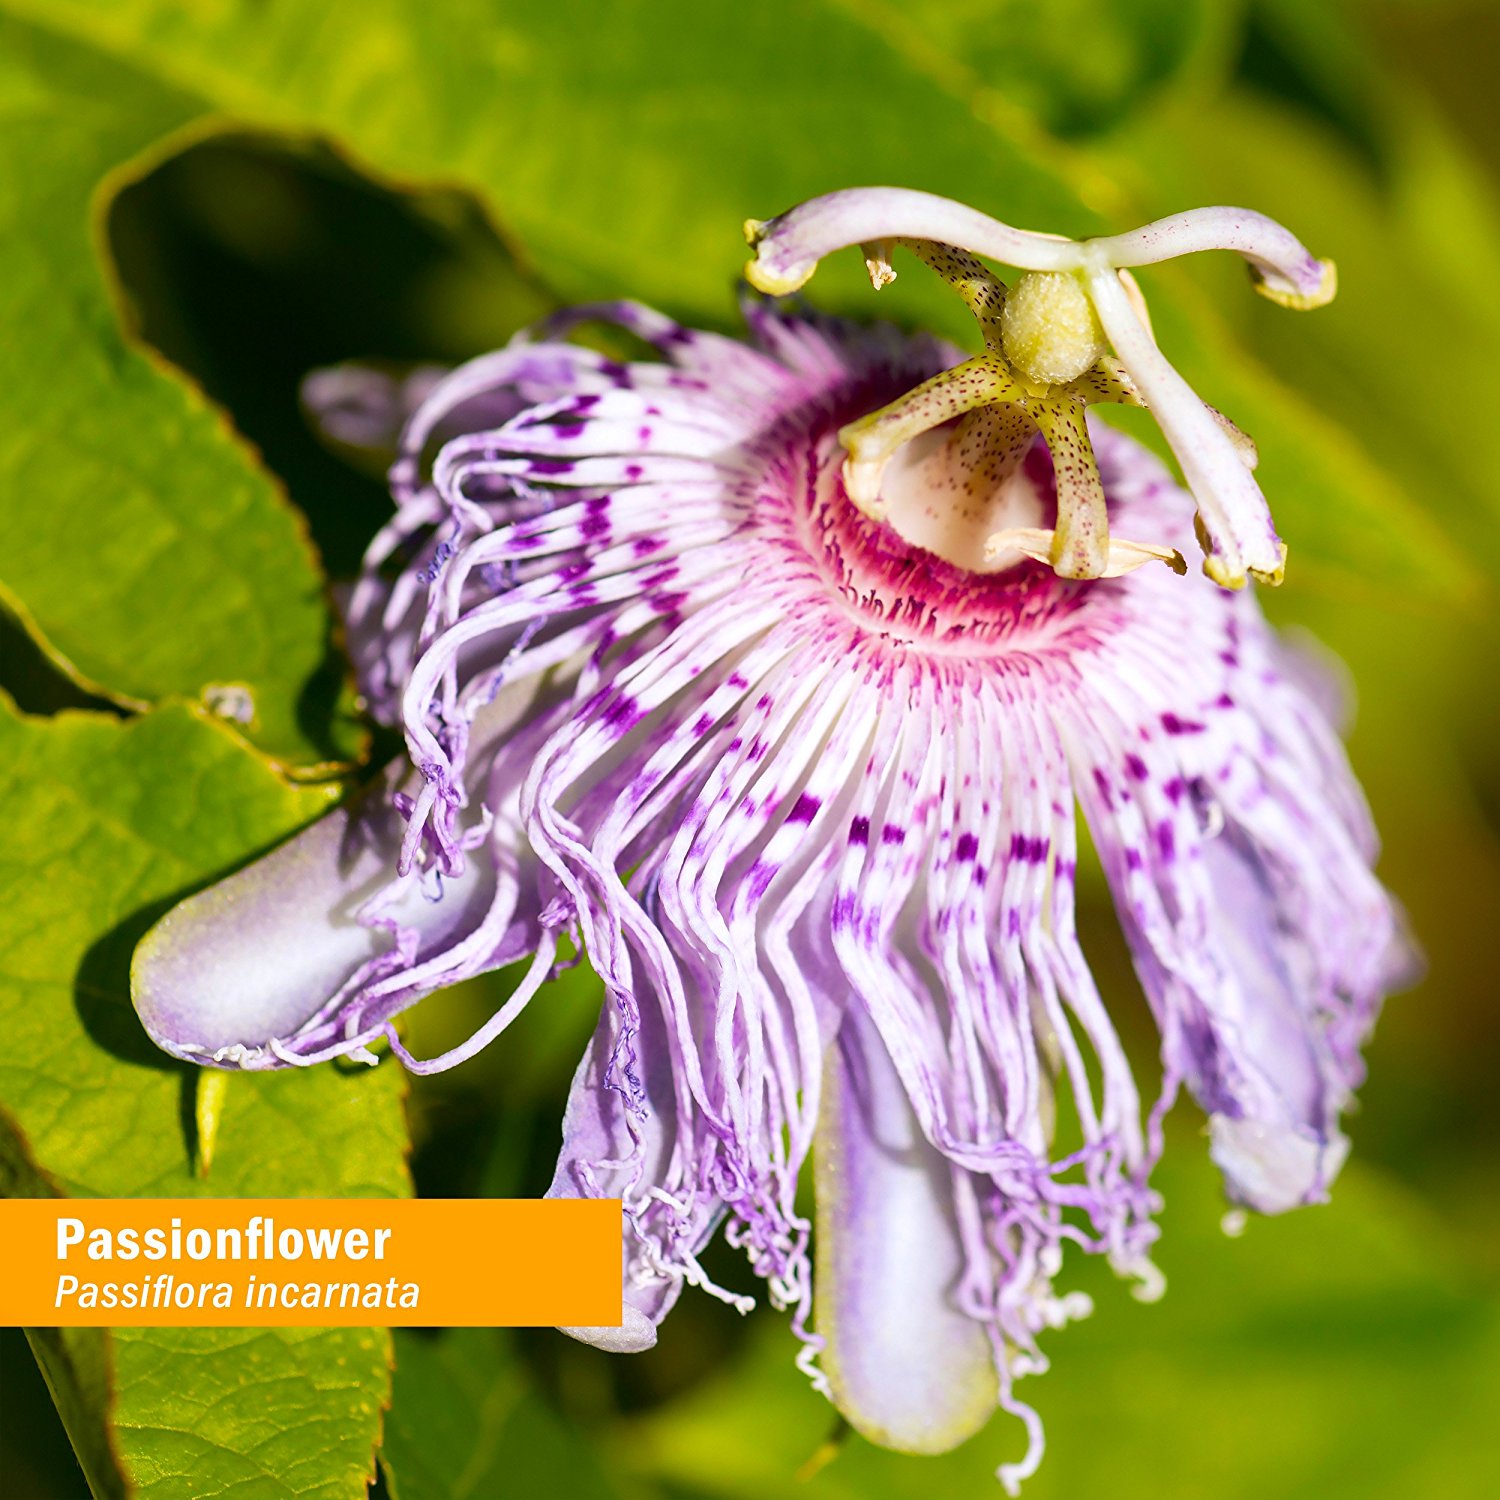 Amazon.com: Herb Pharm Certified Organic Passionflower Extract for ...